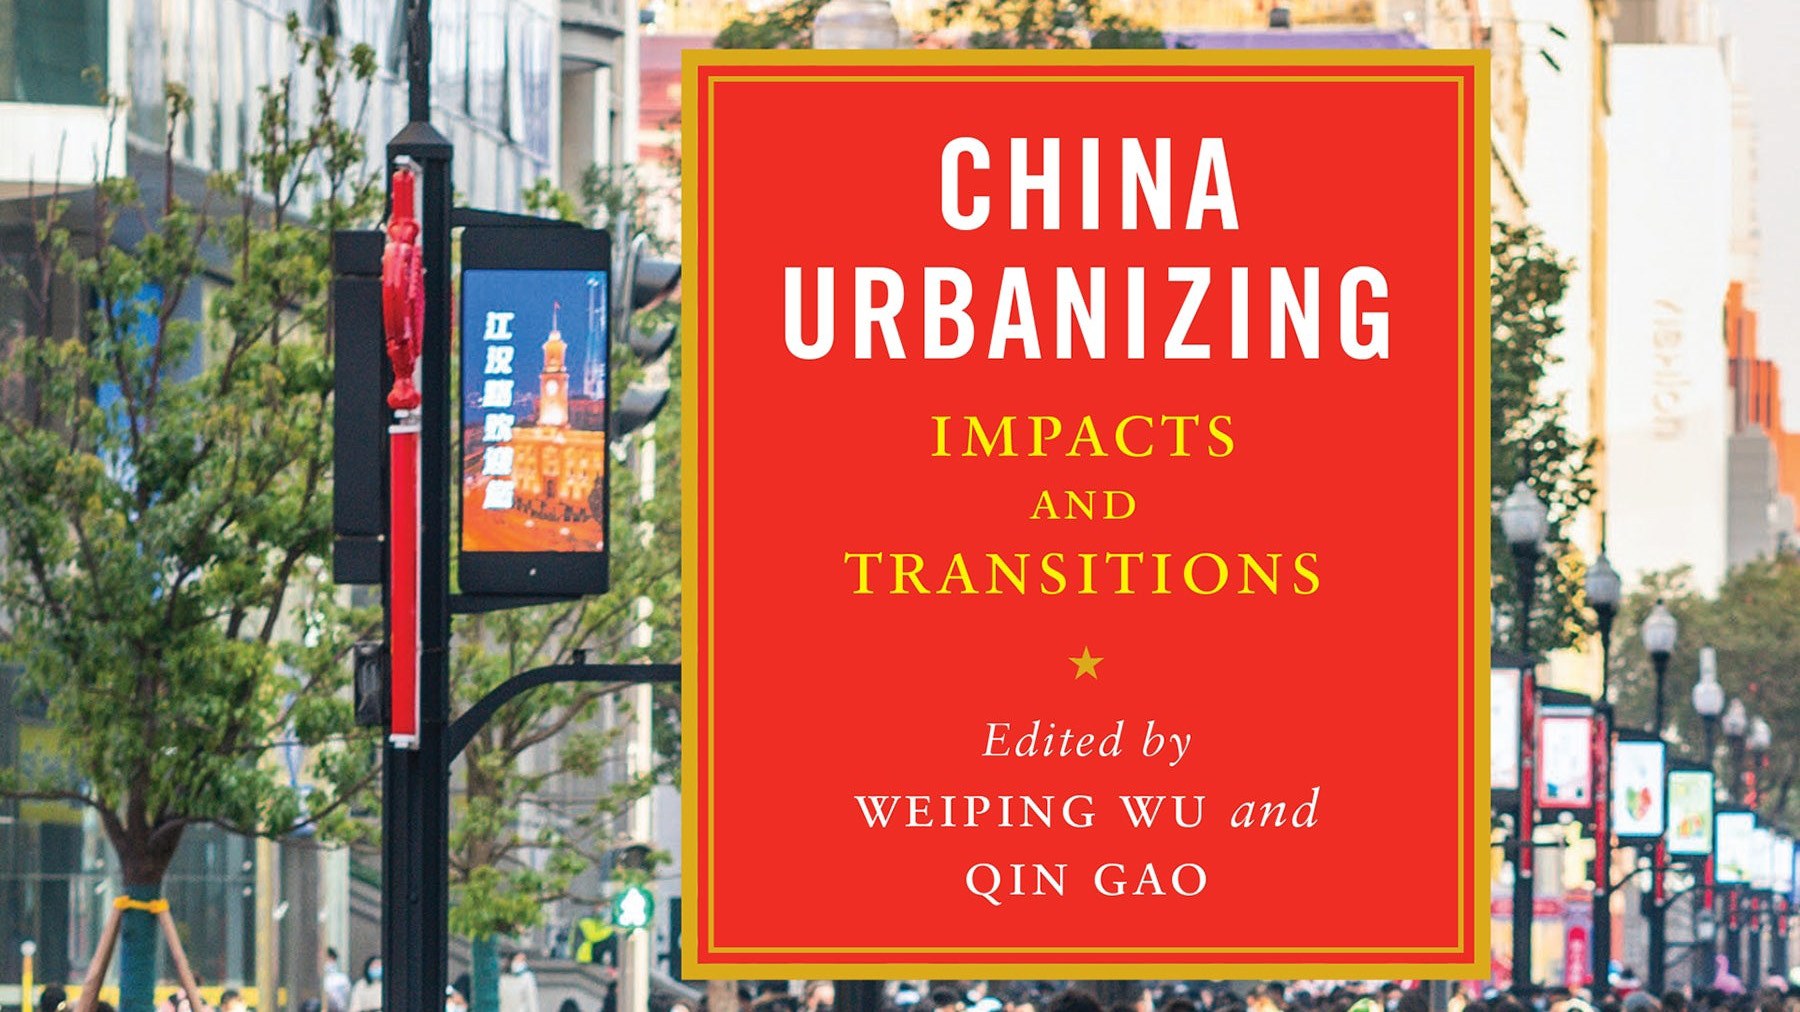 Cover image of Weiping Wu's book, "China Urbanizing: Impacts and Transitions"